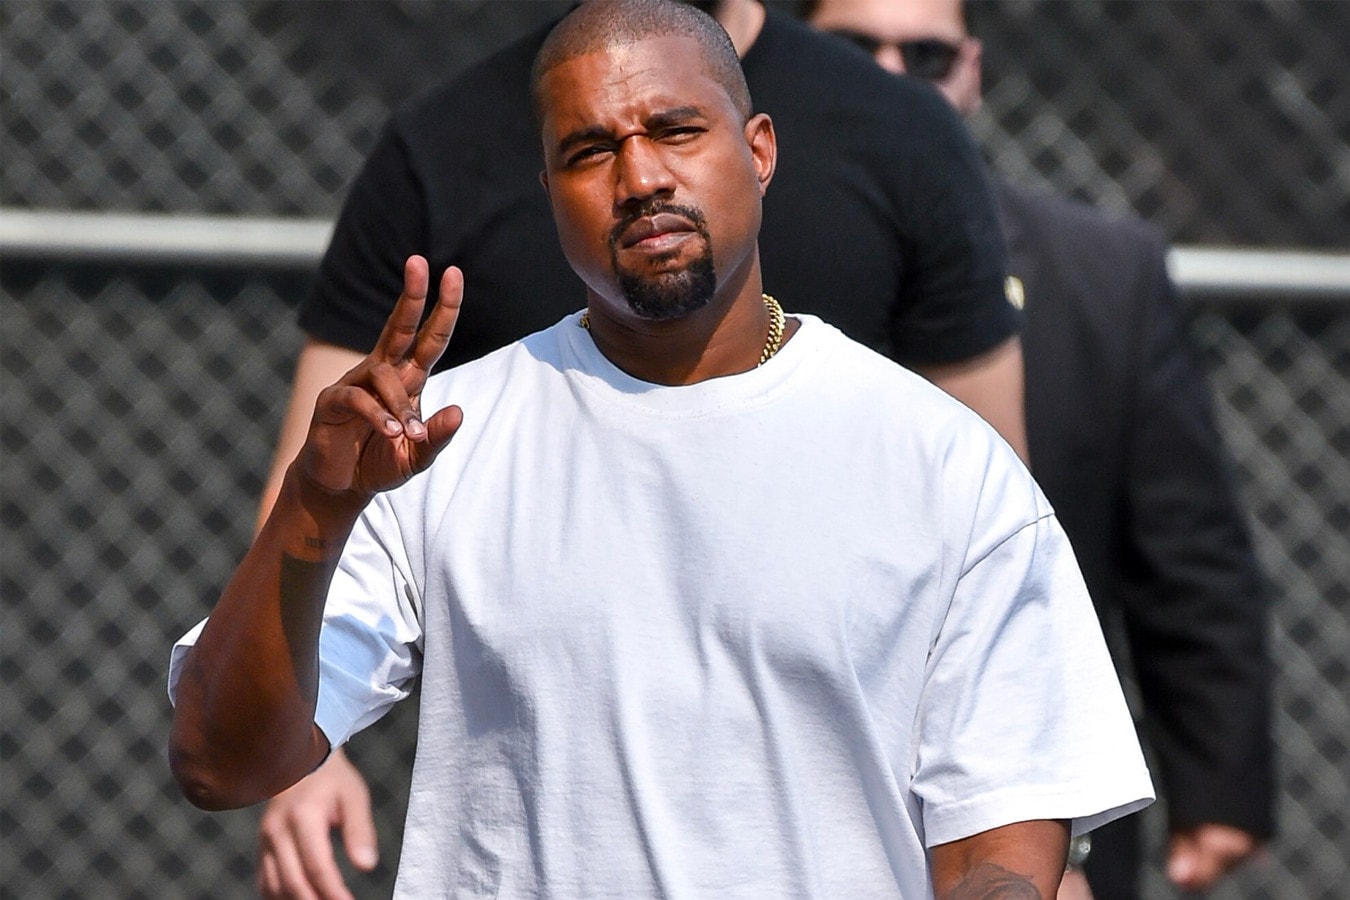 Kanye West Reaches out to Bob Dylan, "Let's Get Together" twitter music collaboration